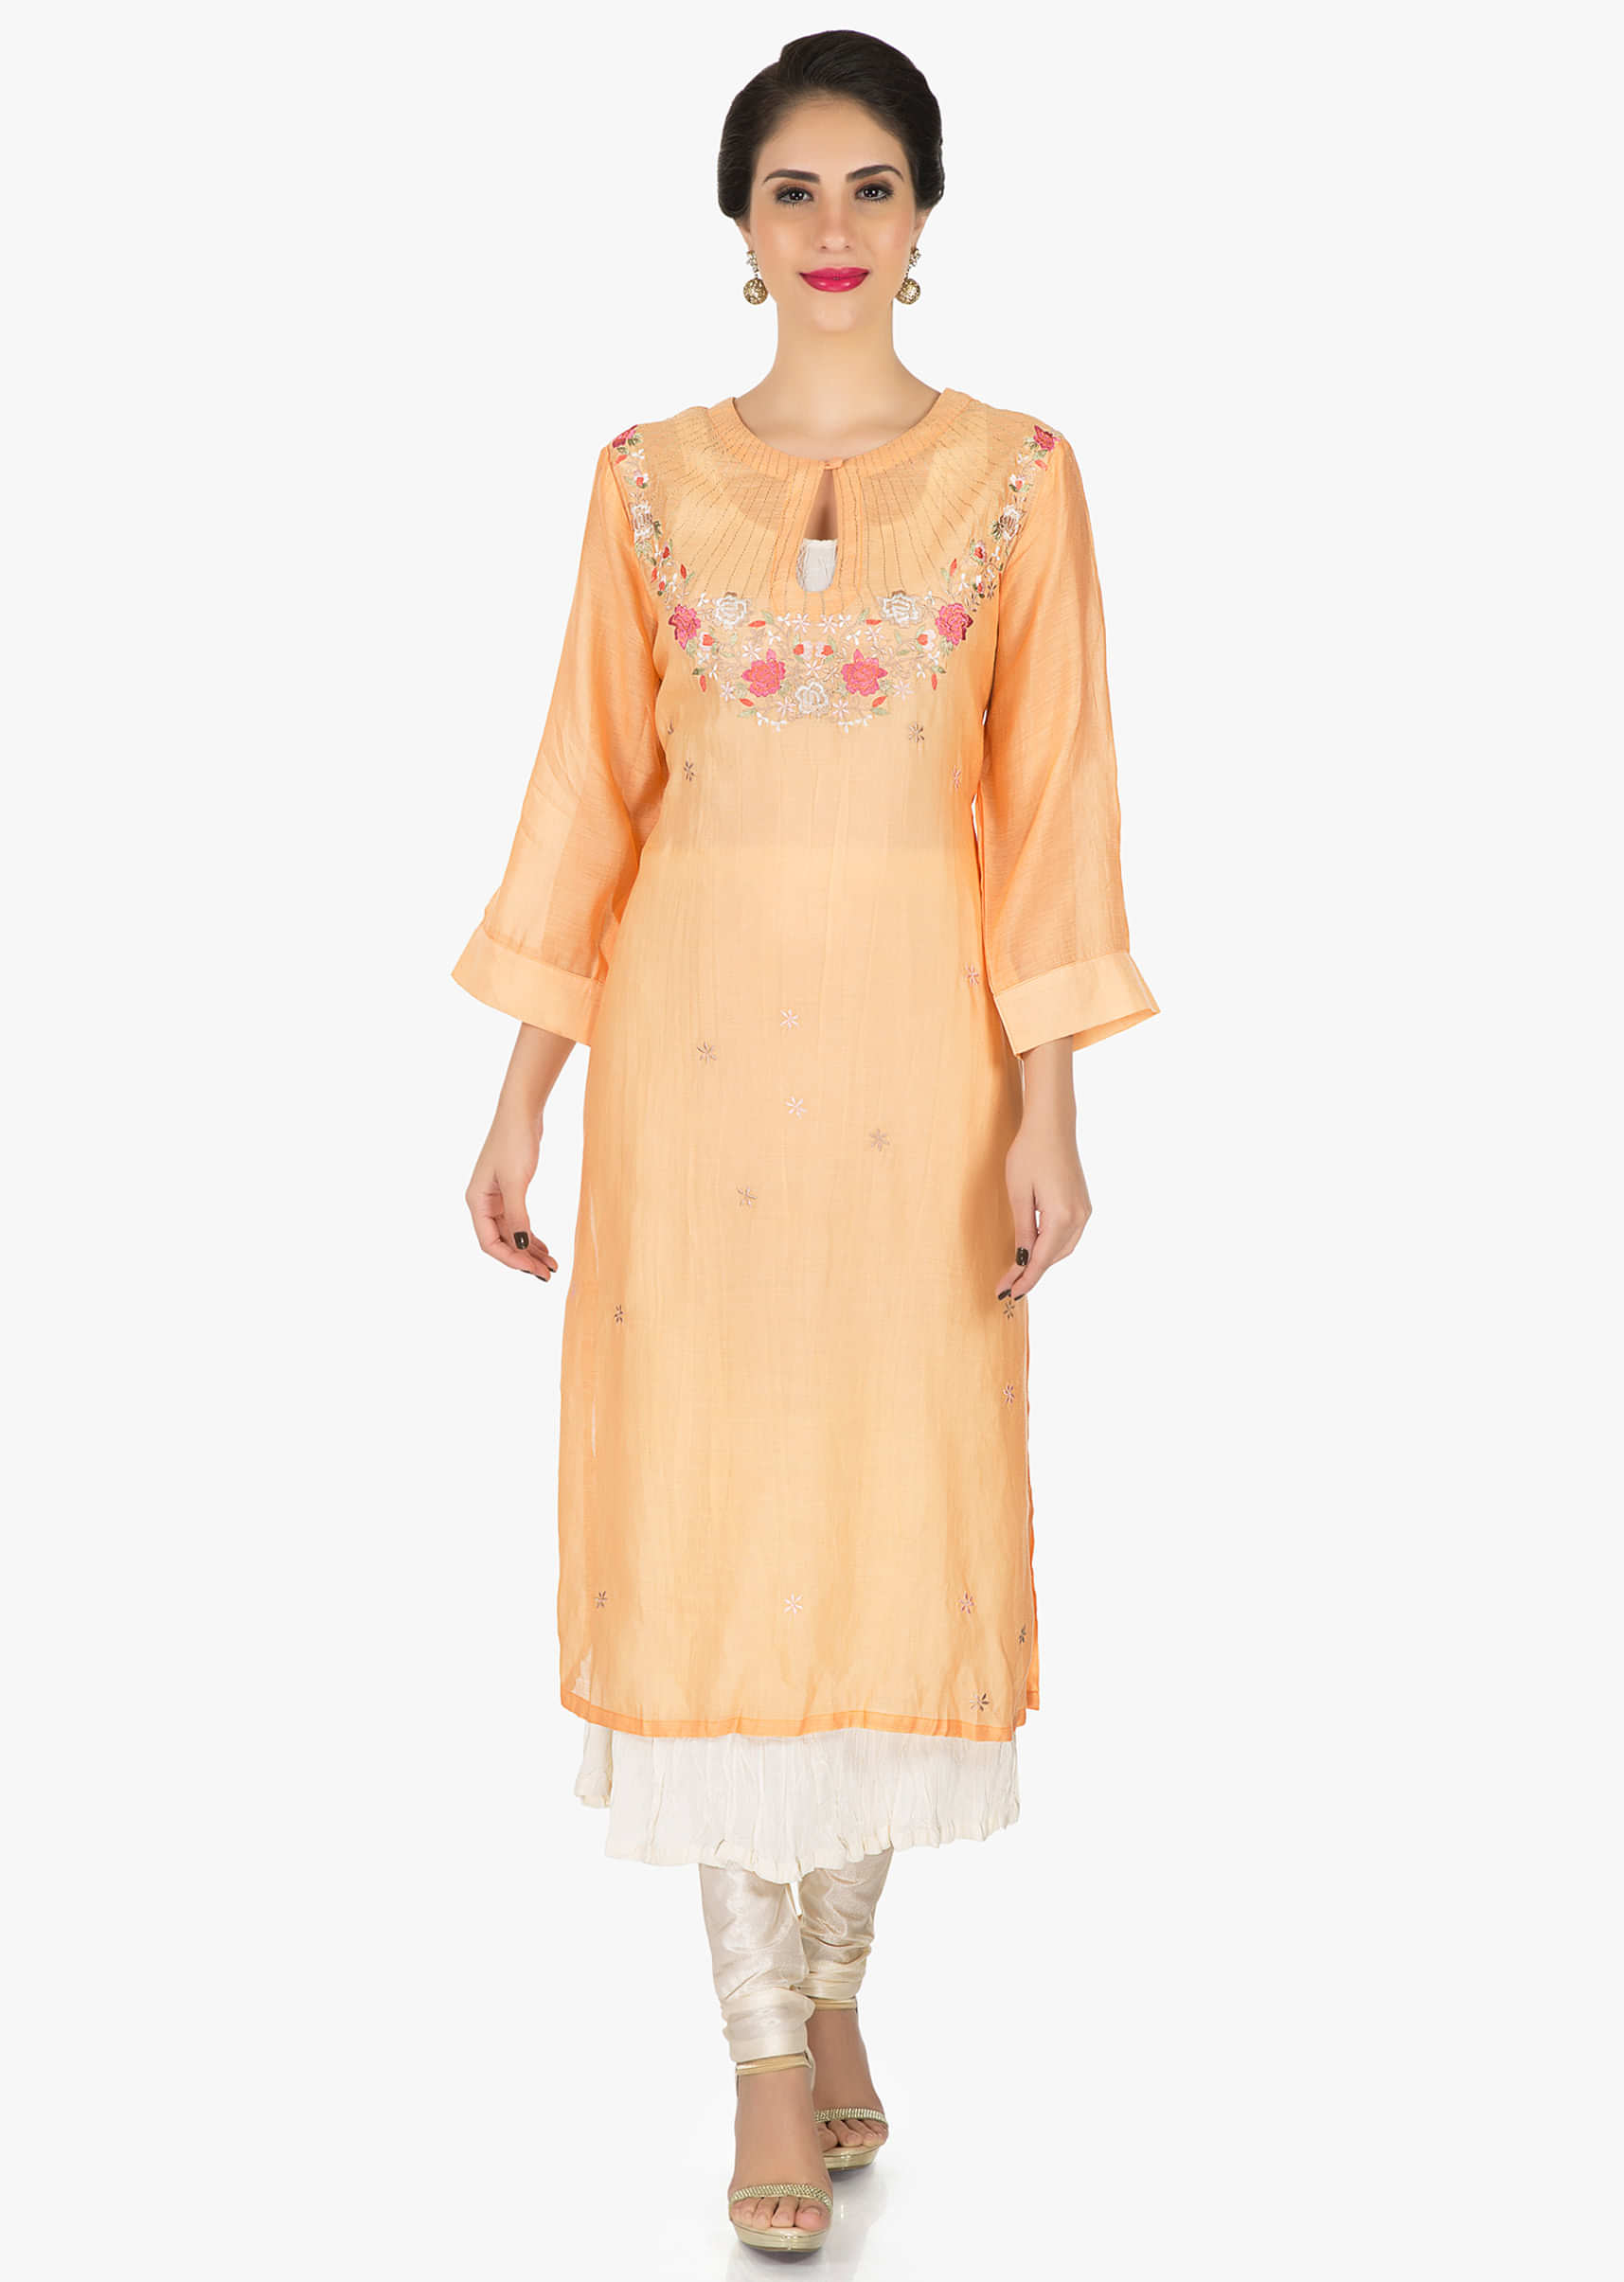 Peach dress in crush cotton enhanced in resham embroidery only on Kalki